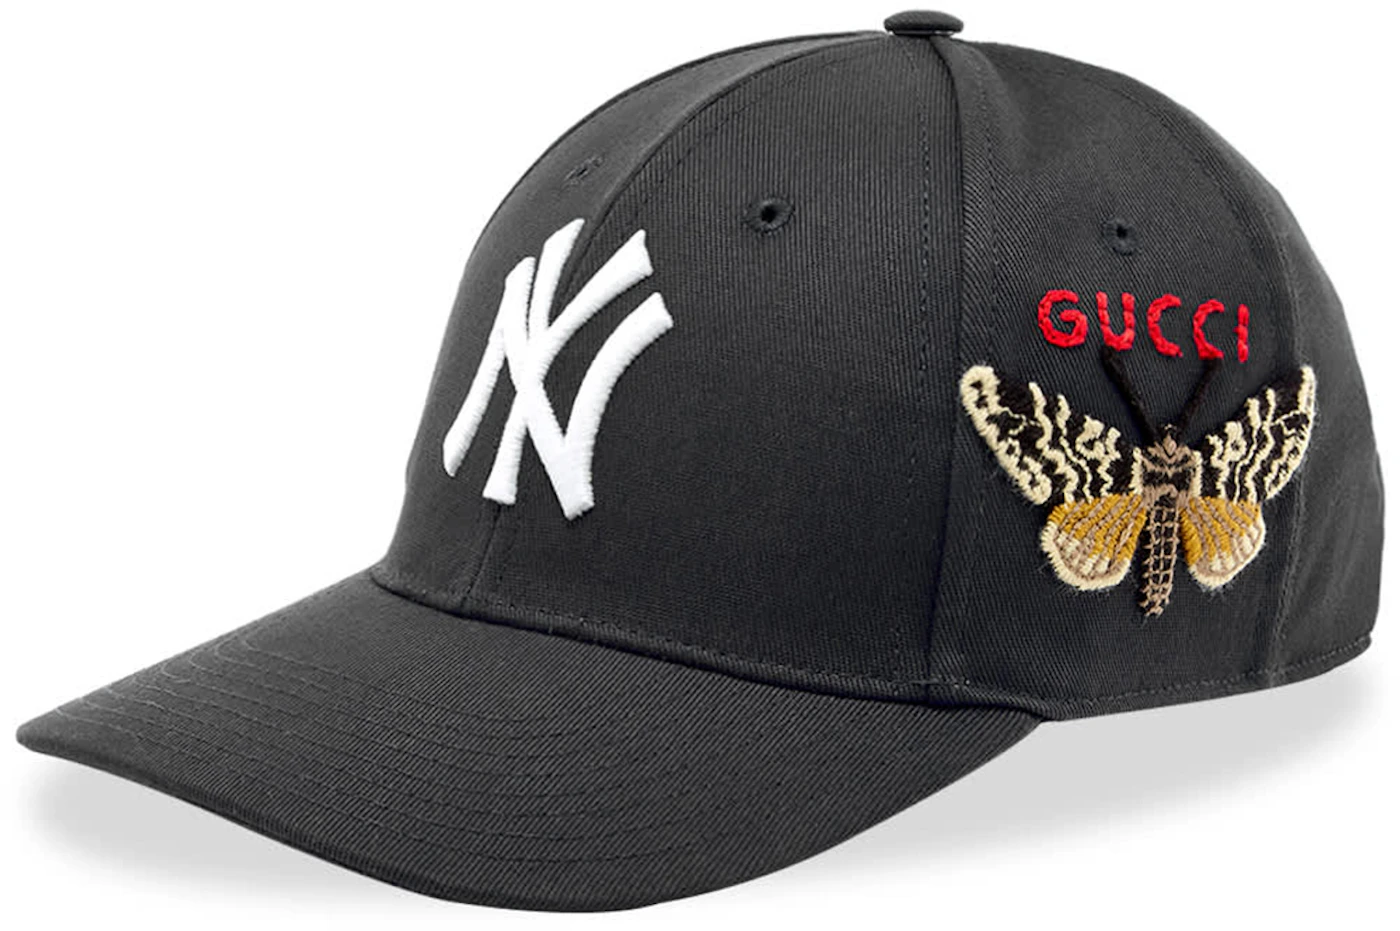 GUCCI BASEBALL CAP M HAT GG FALL WINTER 2019 2020 EMBROIDERED $430